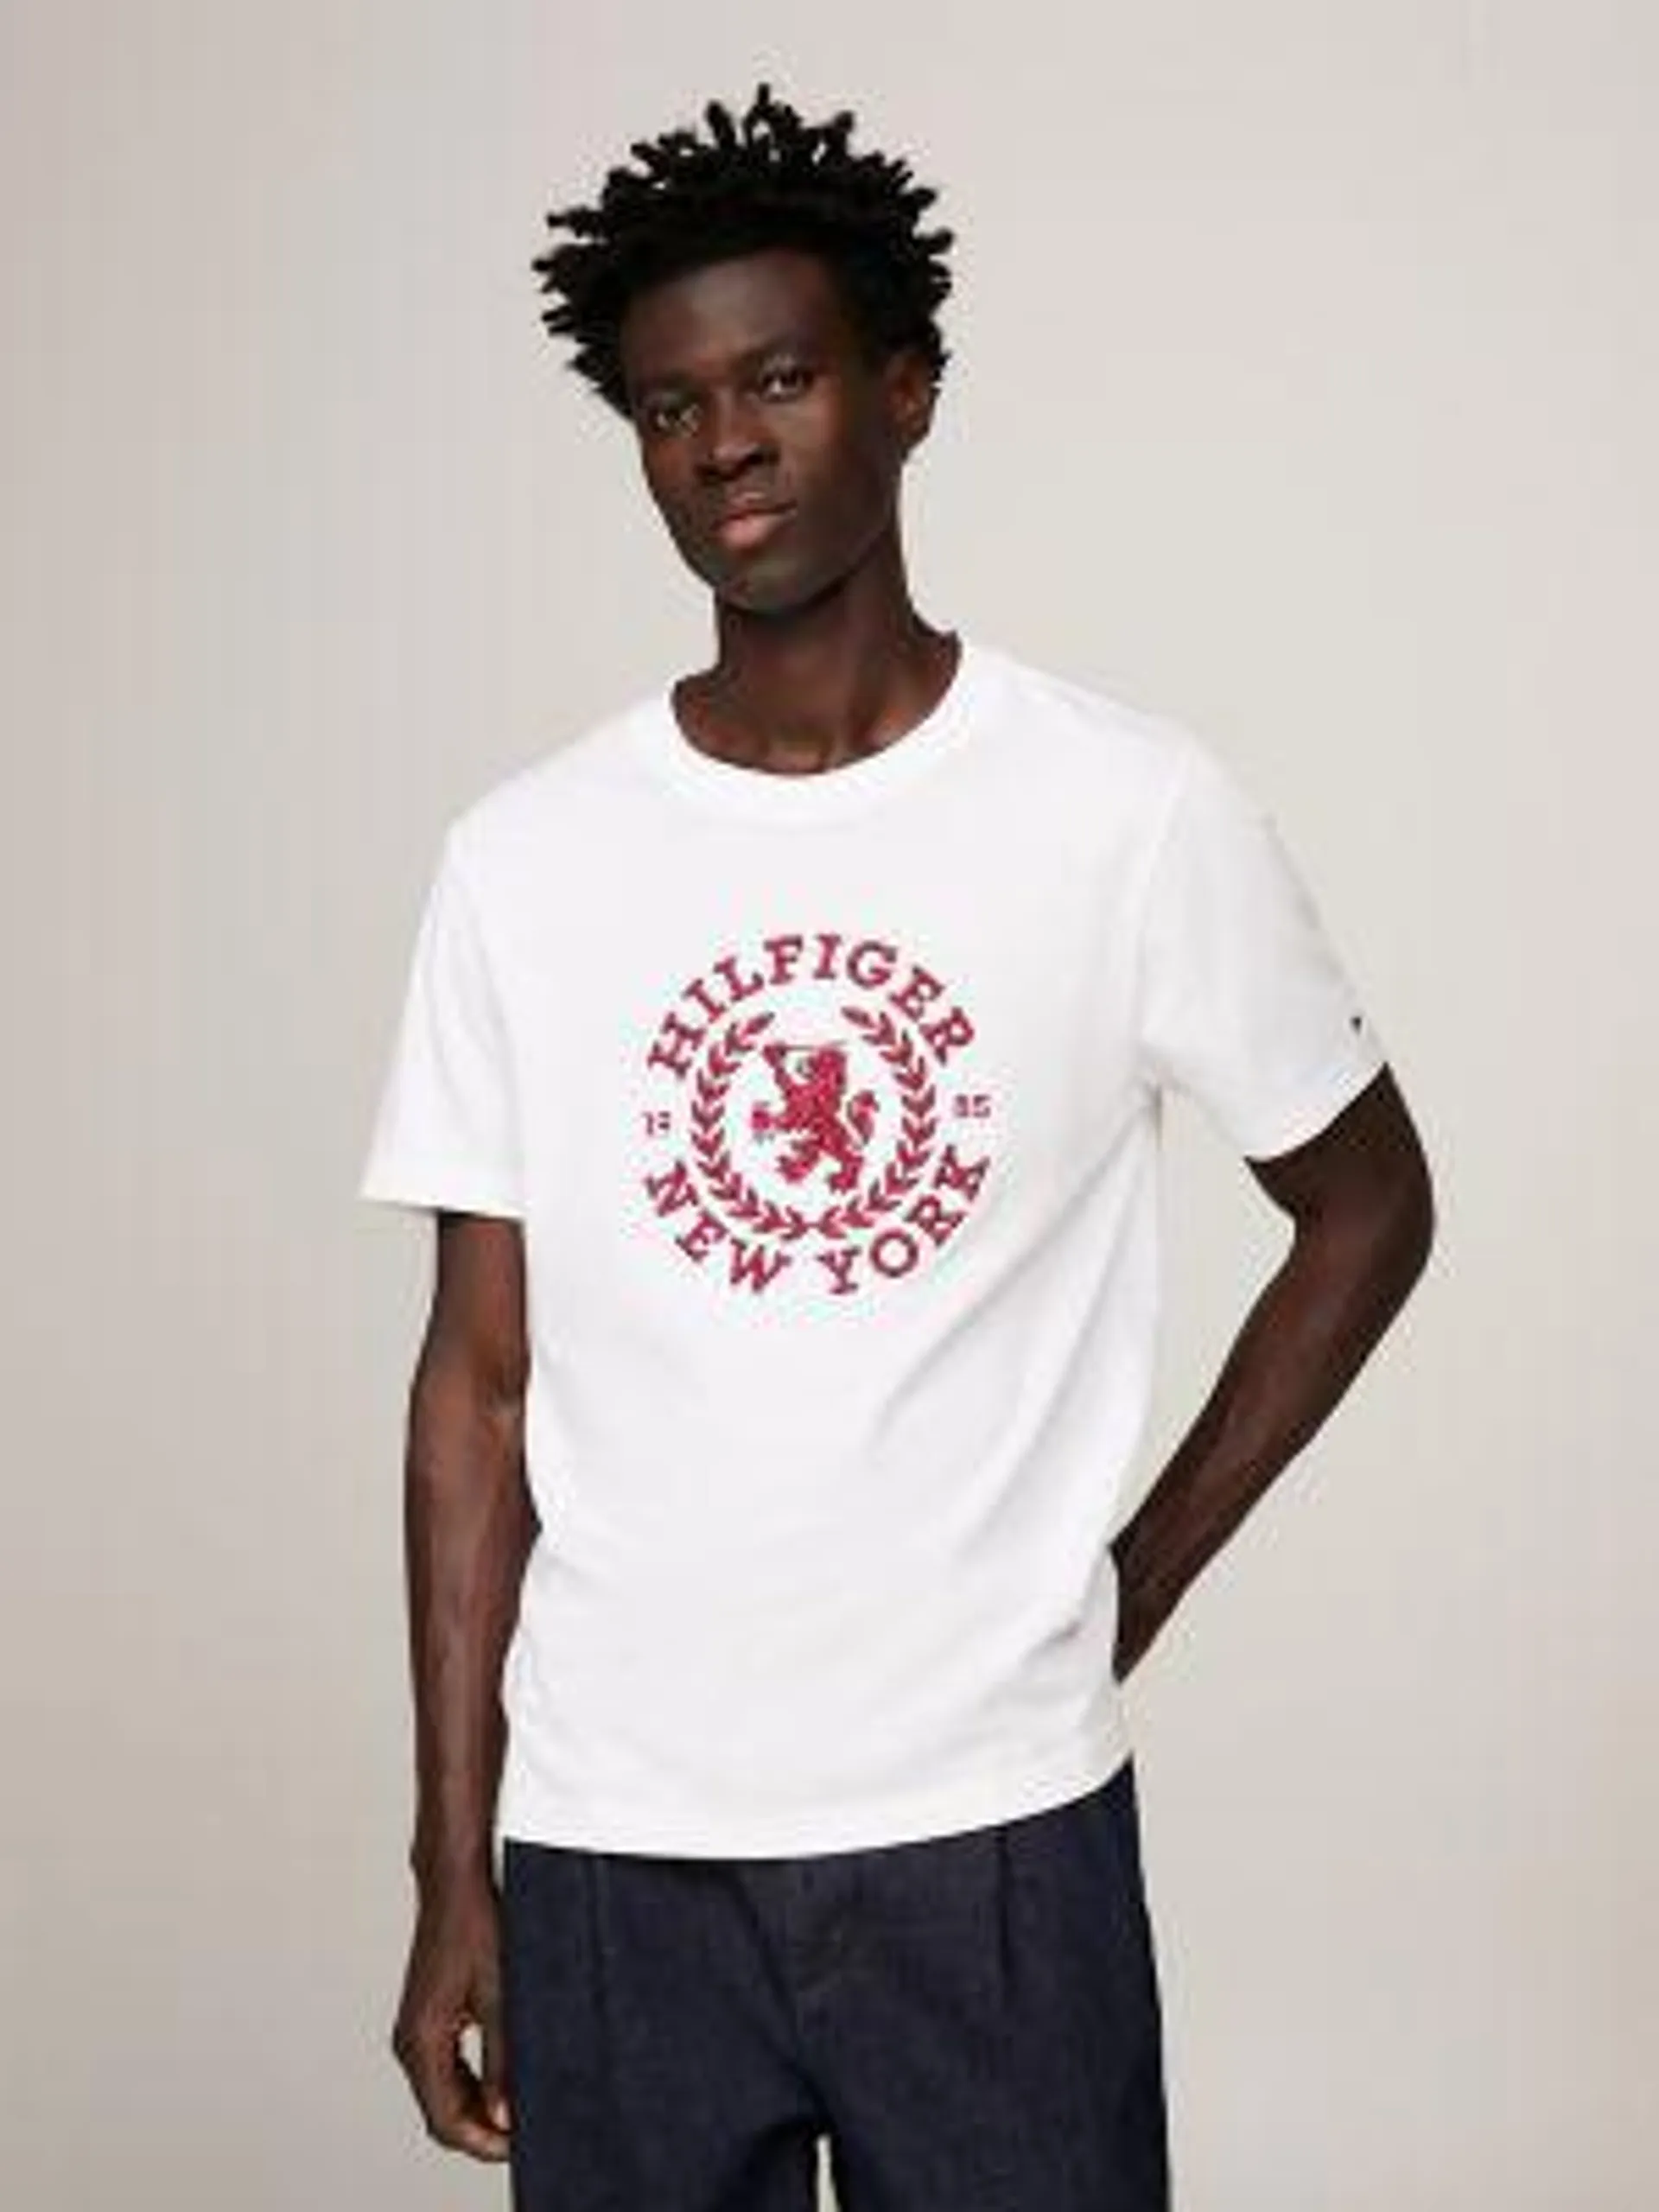 Embroidered Heritage Logo T-Shirt